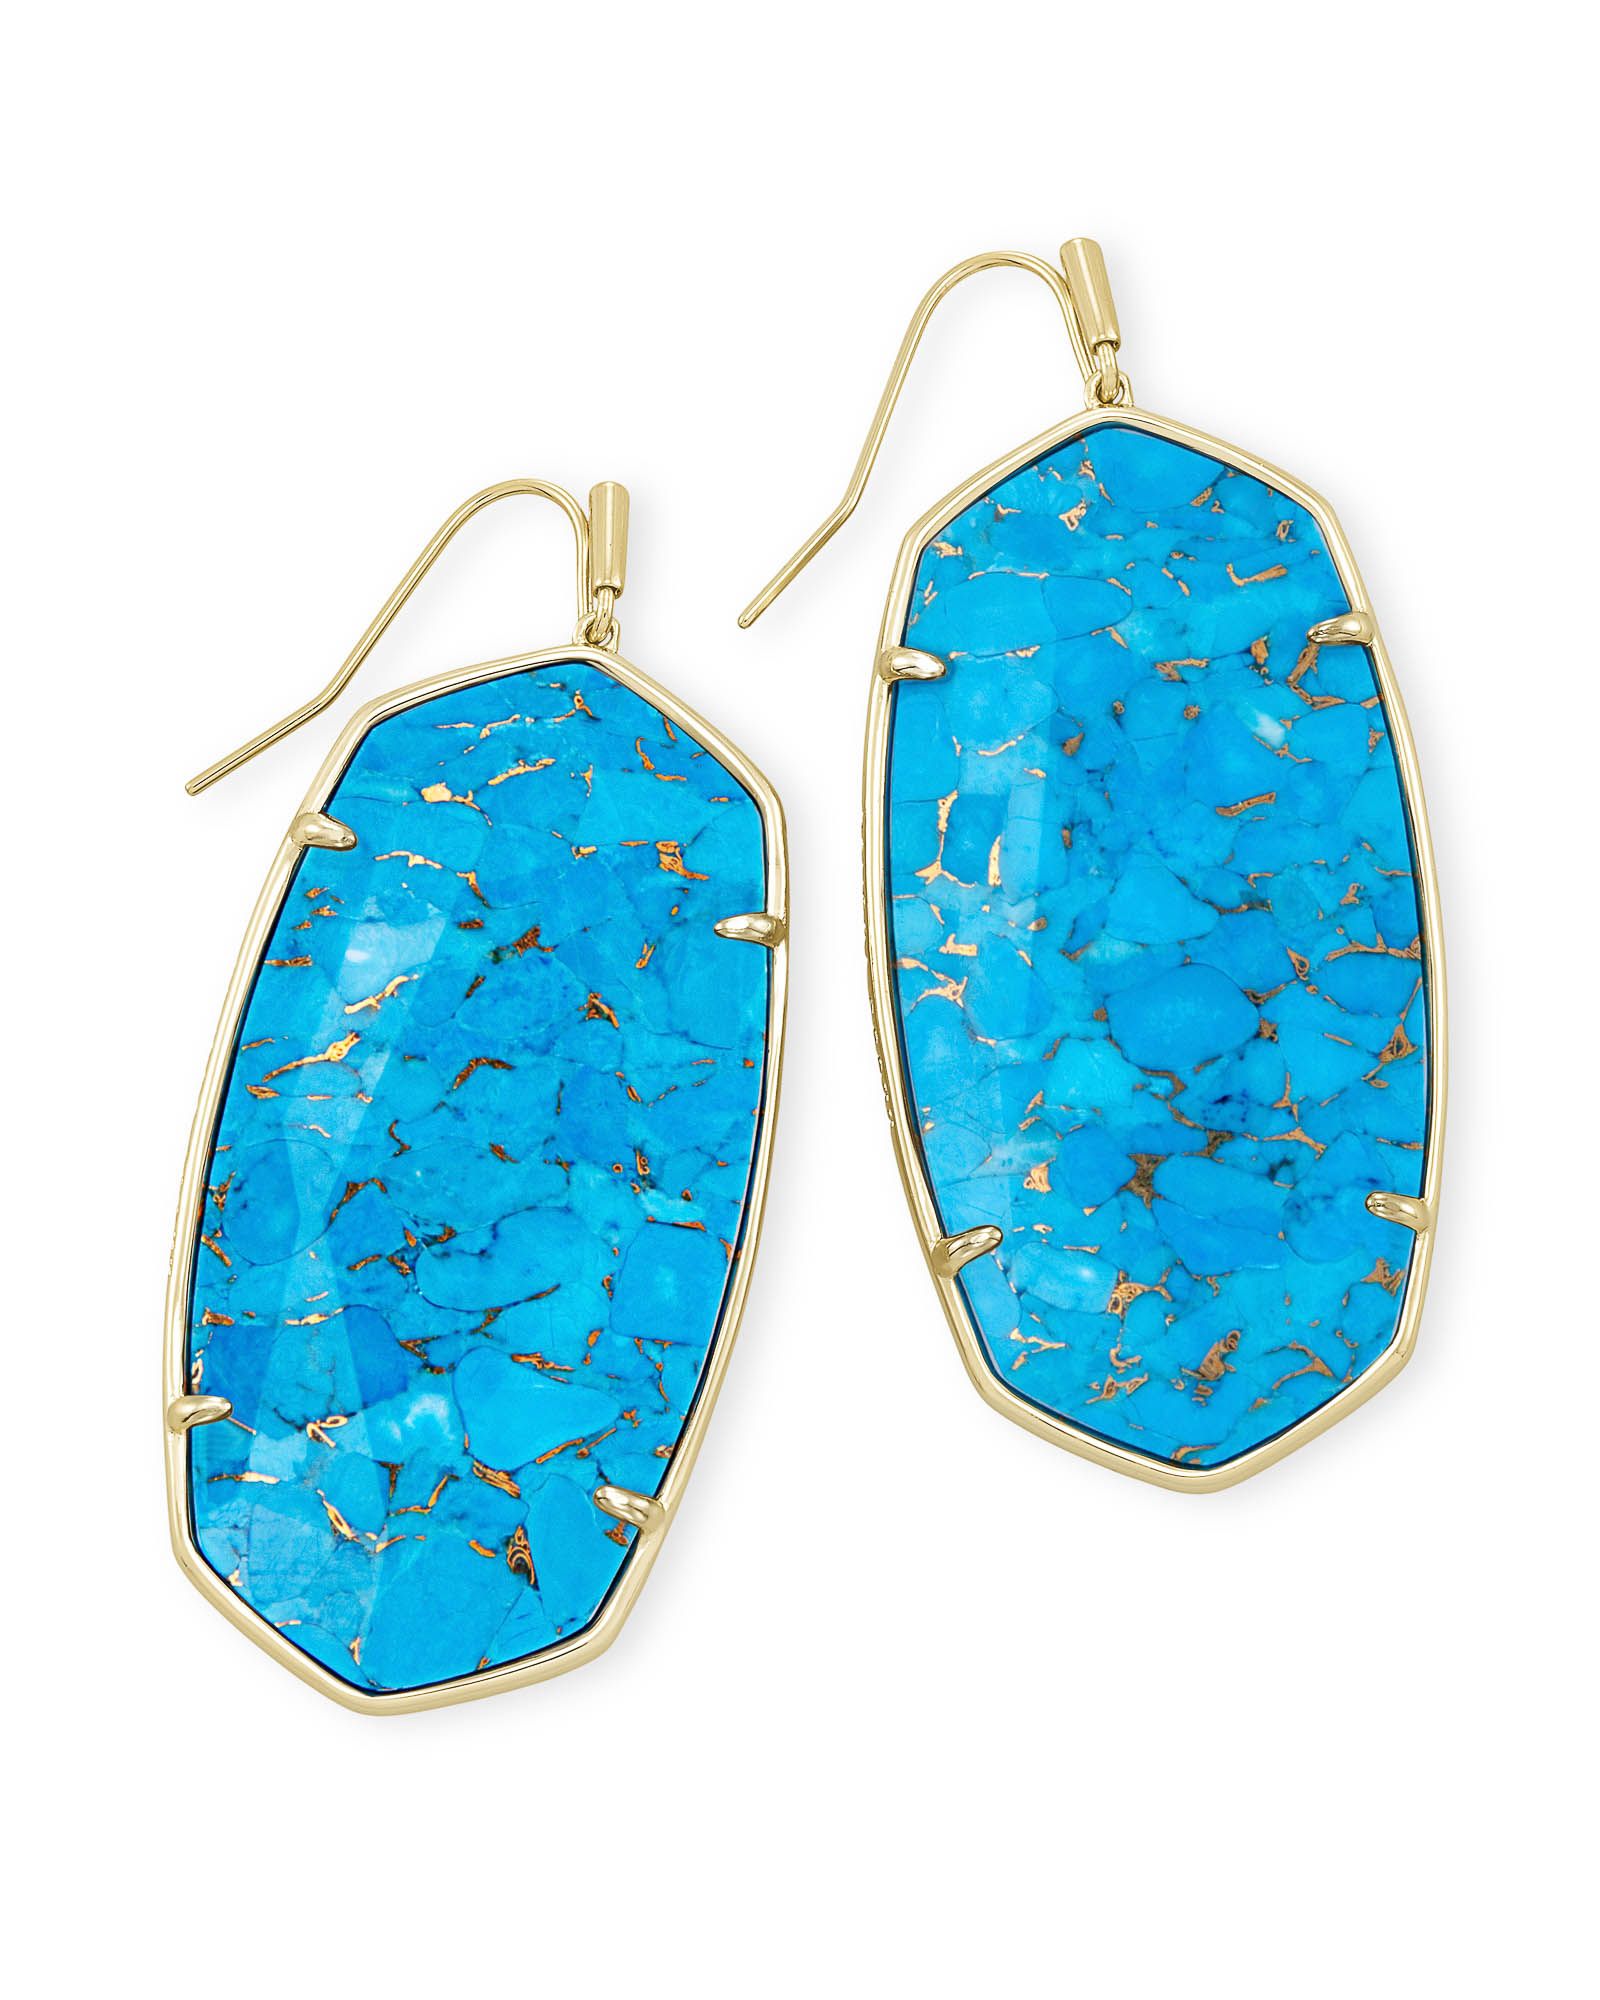 Faceted Danielle Gold Statement Earrings in Bronze Veined Turquoise Magnesite | Kendra Scott